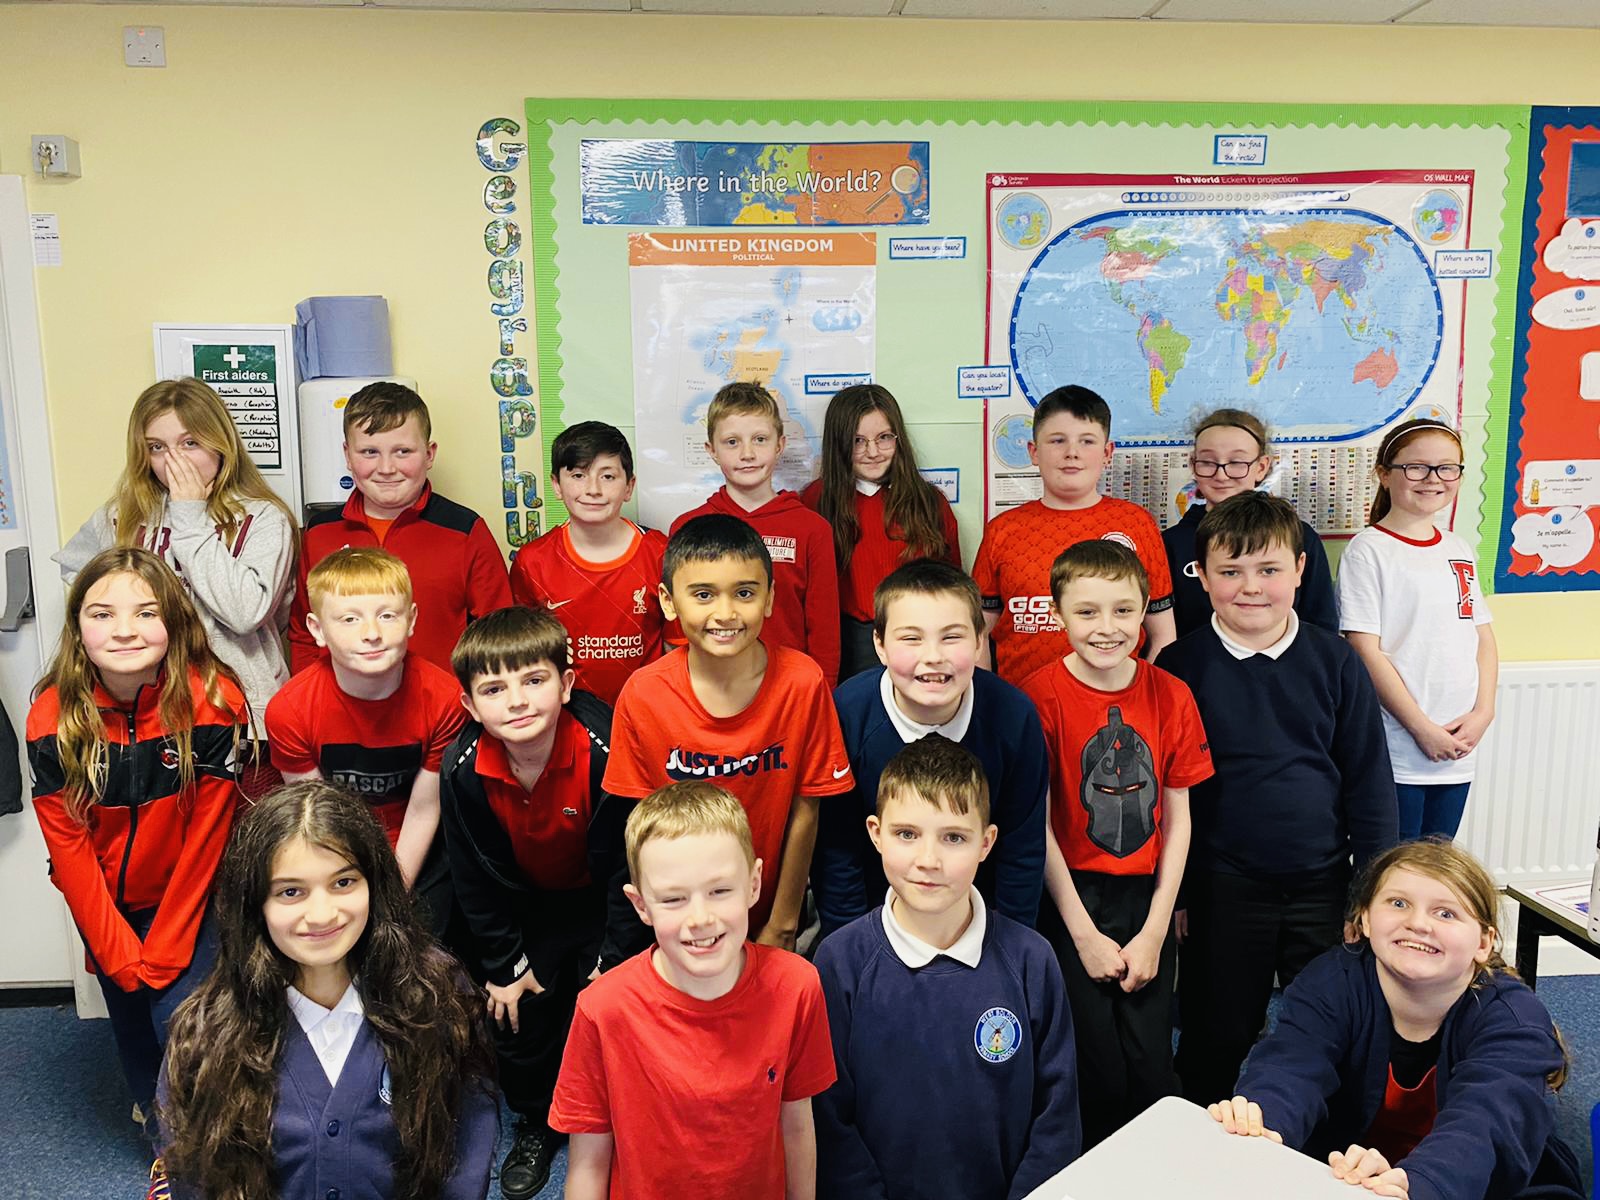 Year 6 children wearing red for CHUF